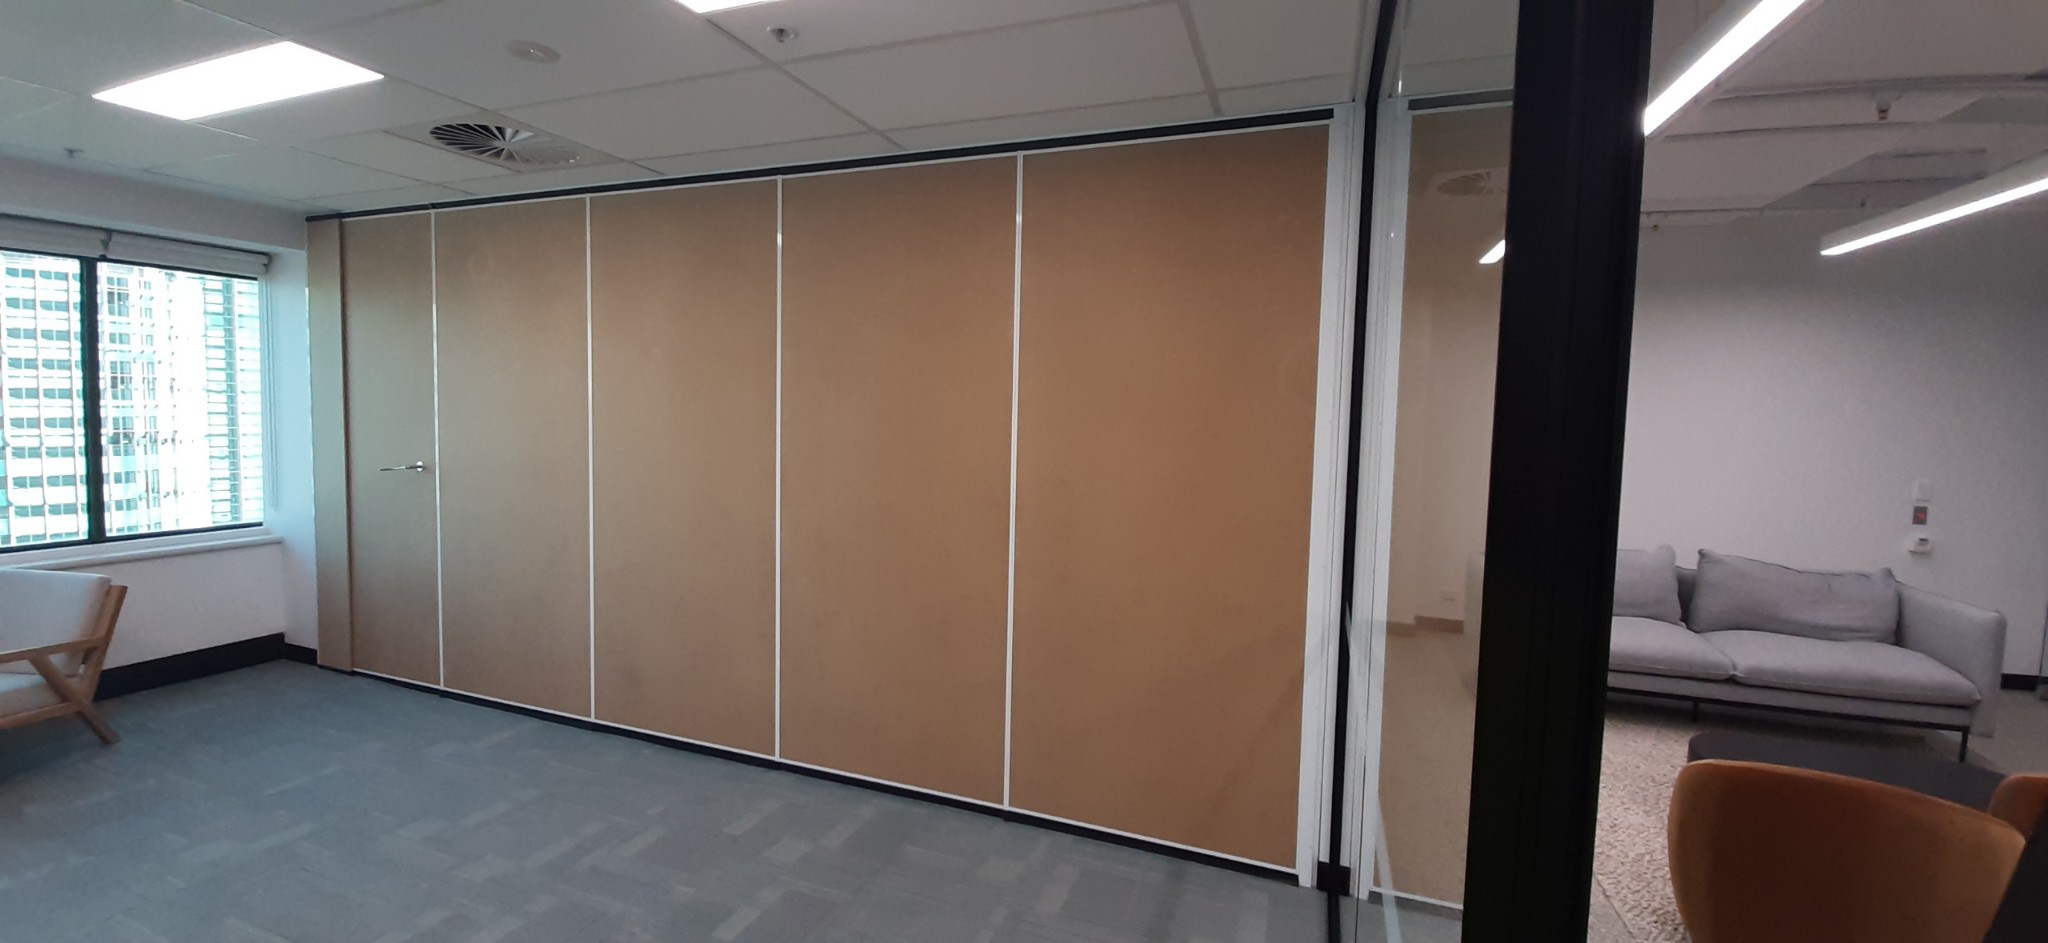 Stacking Operable Wall at Peakstone's Office Fit-Out by Bildspec